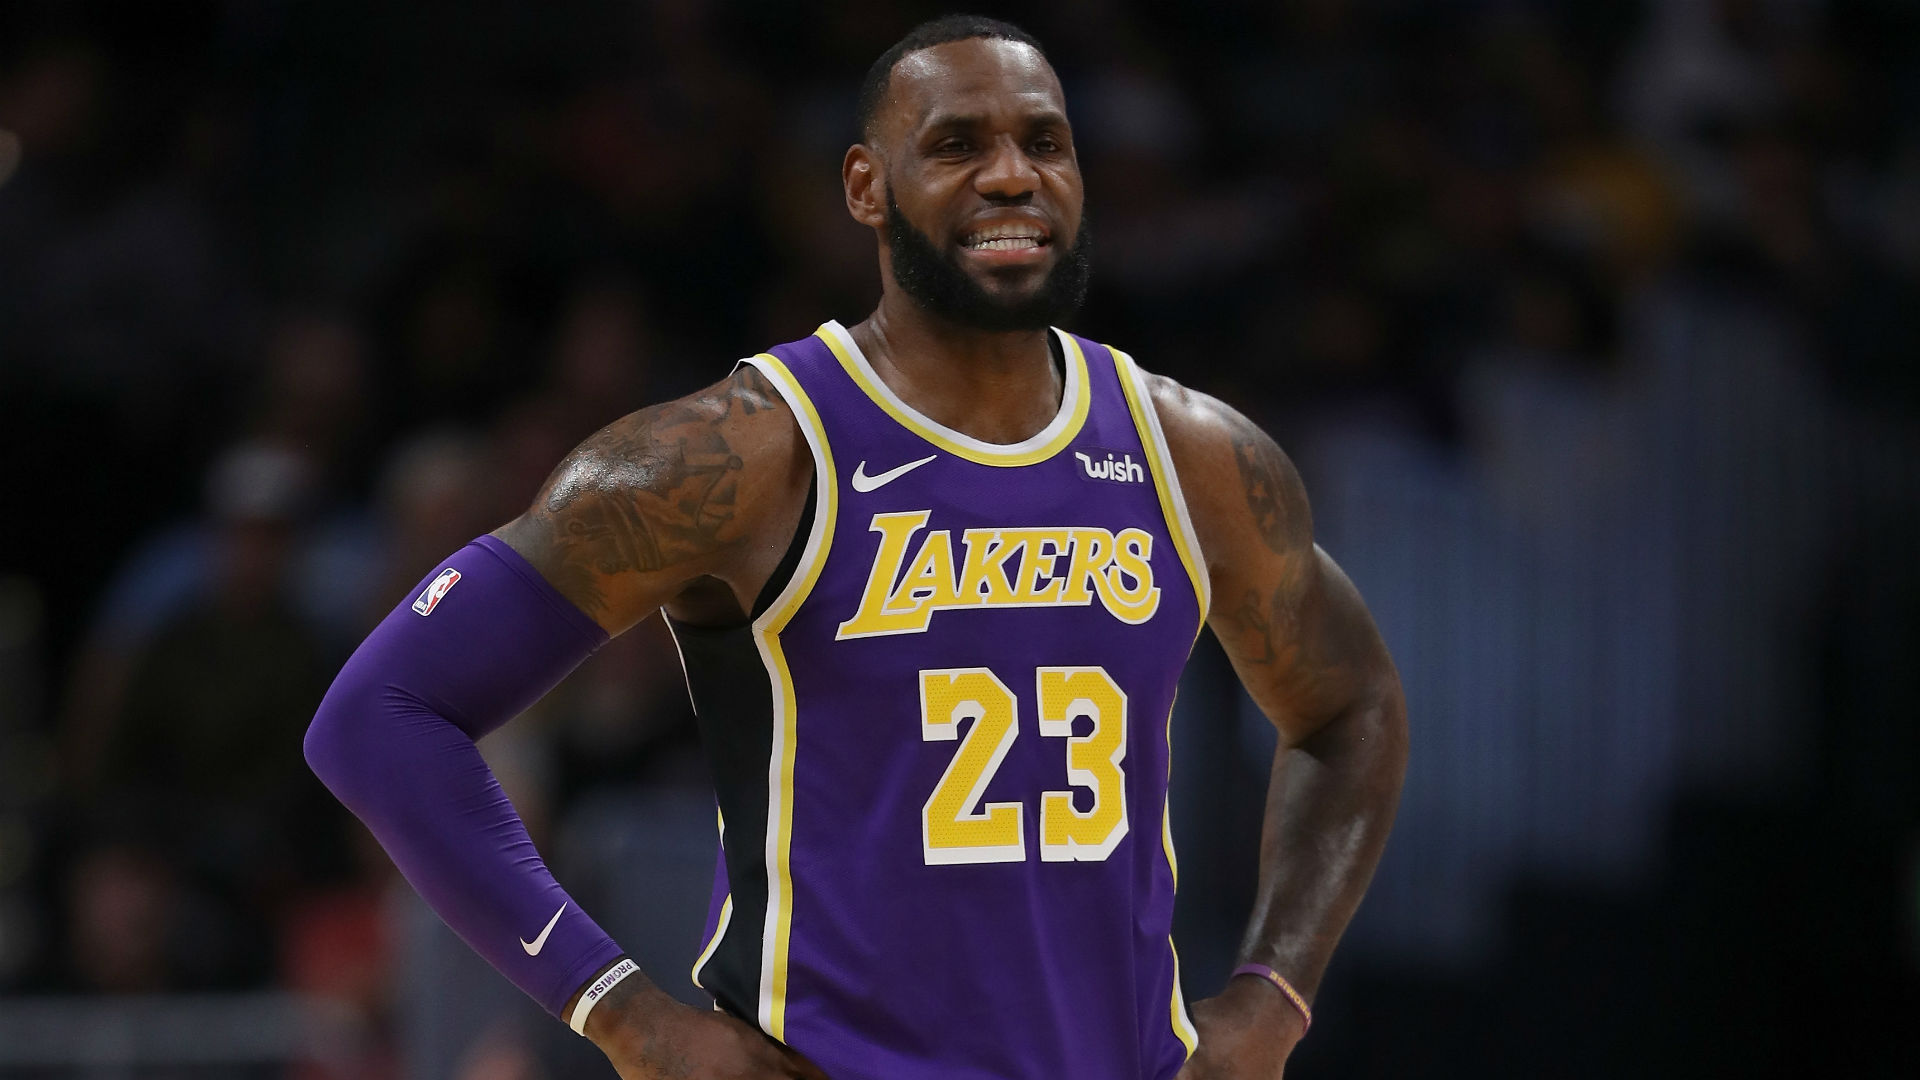 A Memphis Grizzlies employee who regularly wears LeBron James' shoes got an extra special pair when the Los Angeles Lakers came to town.